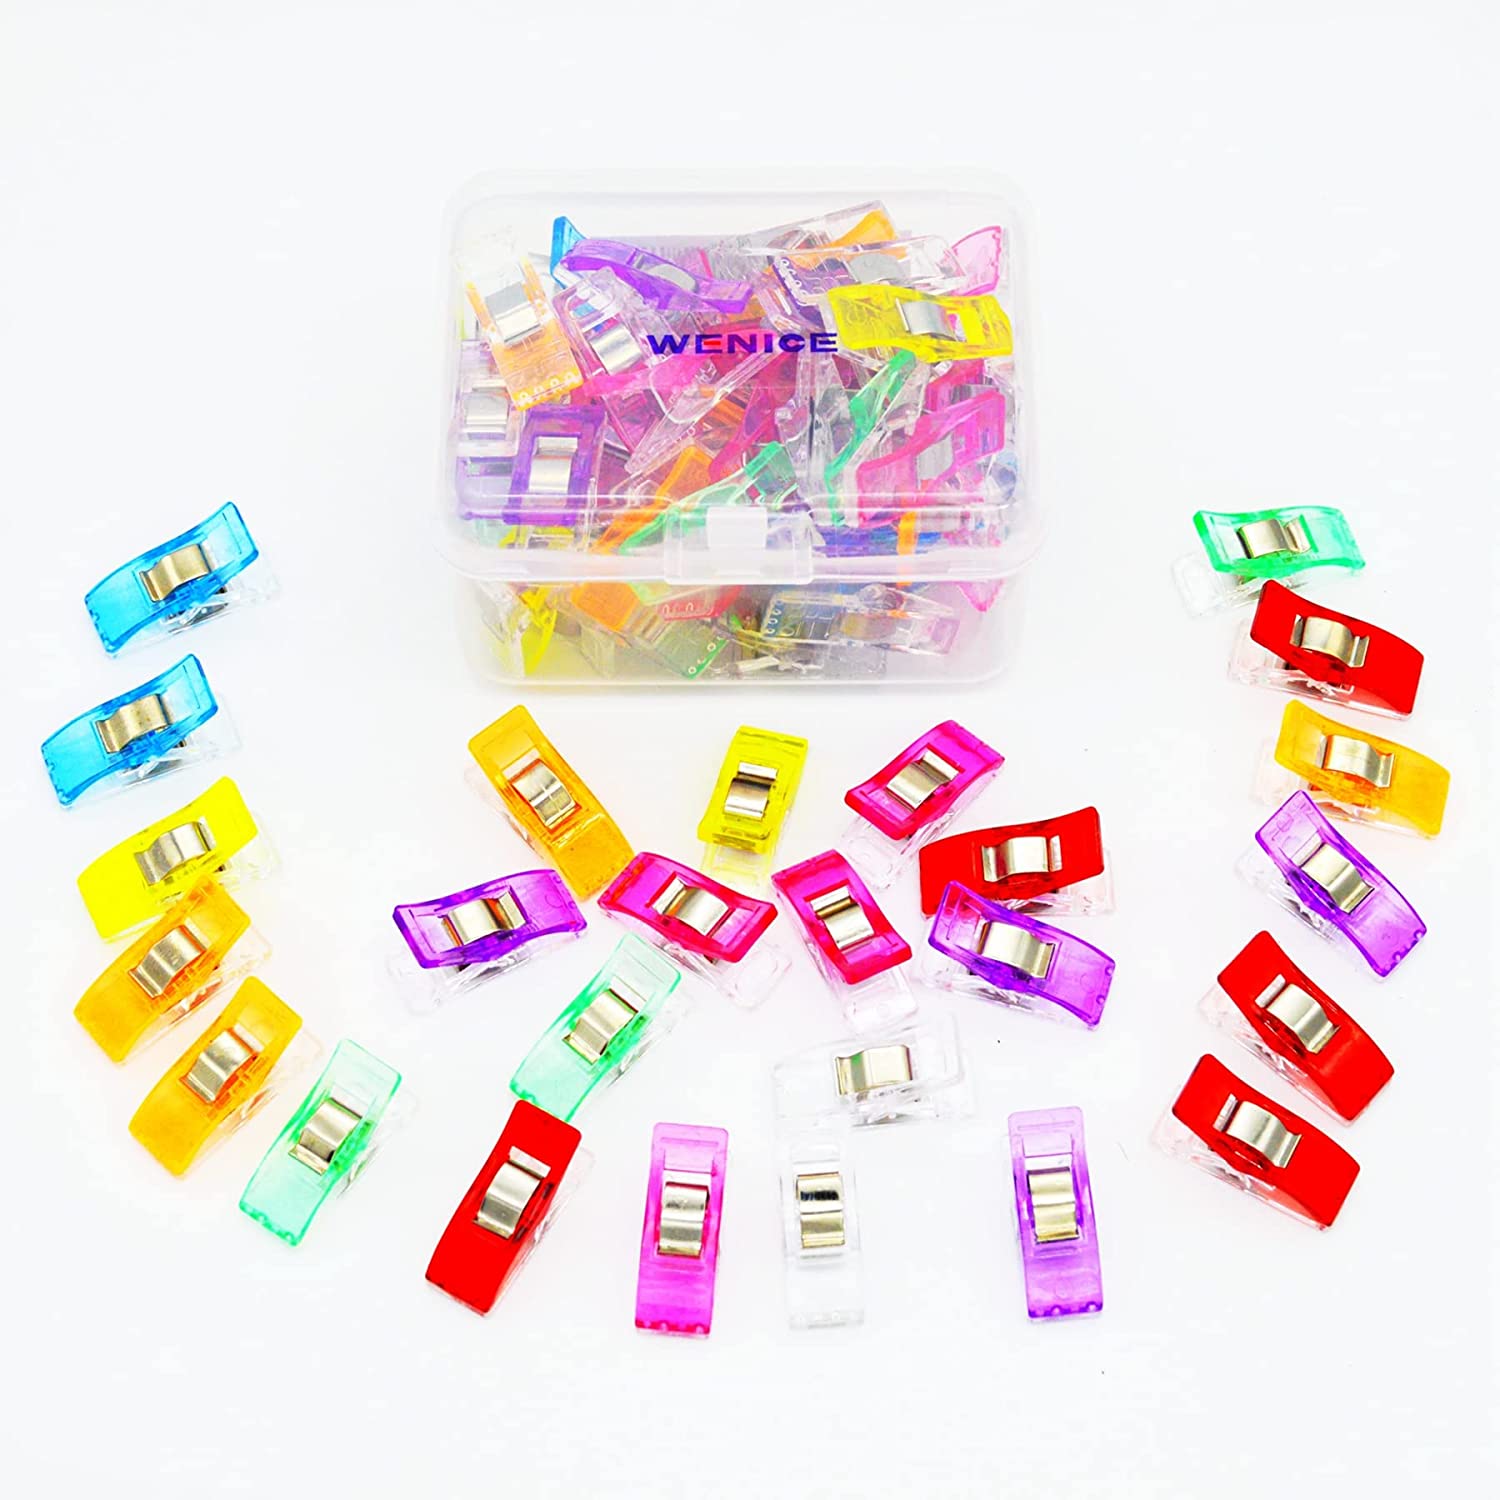  Doukey 100PCS Large Sewing Clips Fabric Clips Sewing Notions  for Sewing Quilting Supplies Crafting Tools Jumbo Quilt Clips, Multipurpose  Plastic Clips Assorted Colors Craft Clips Quilting Accessories : Arts,  Crafts